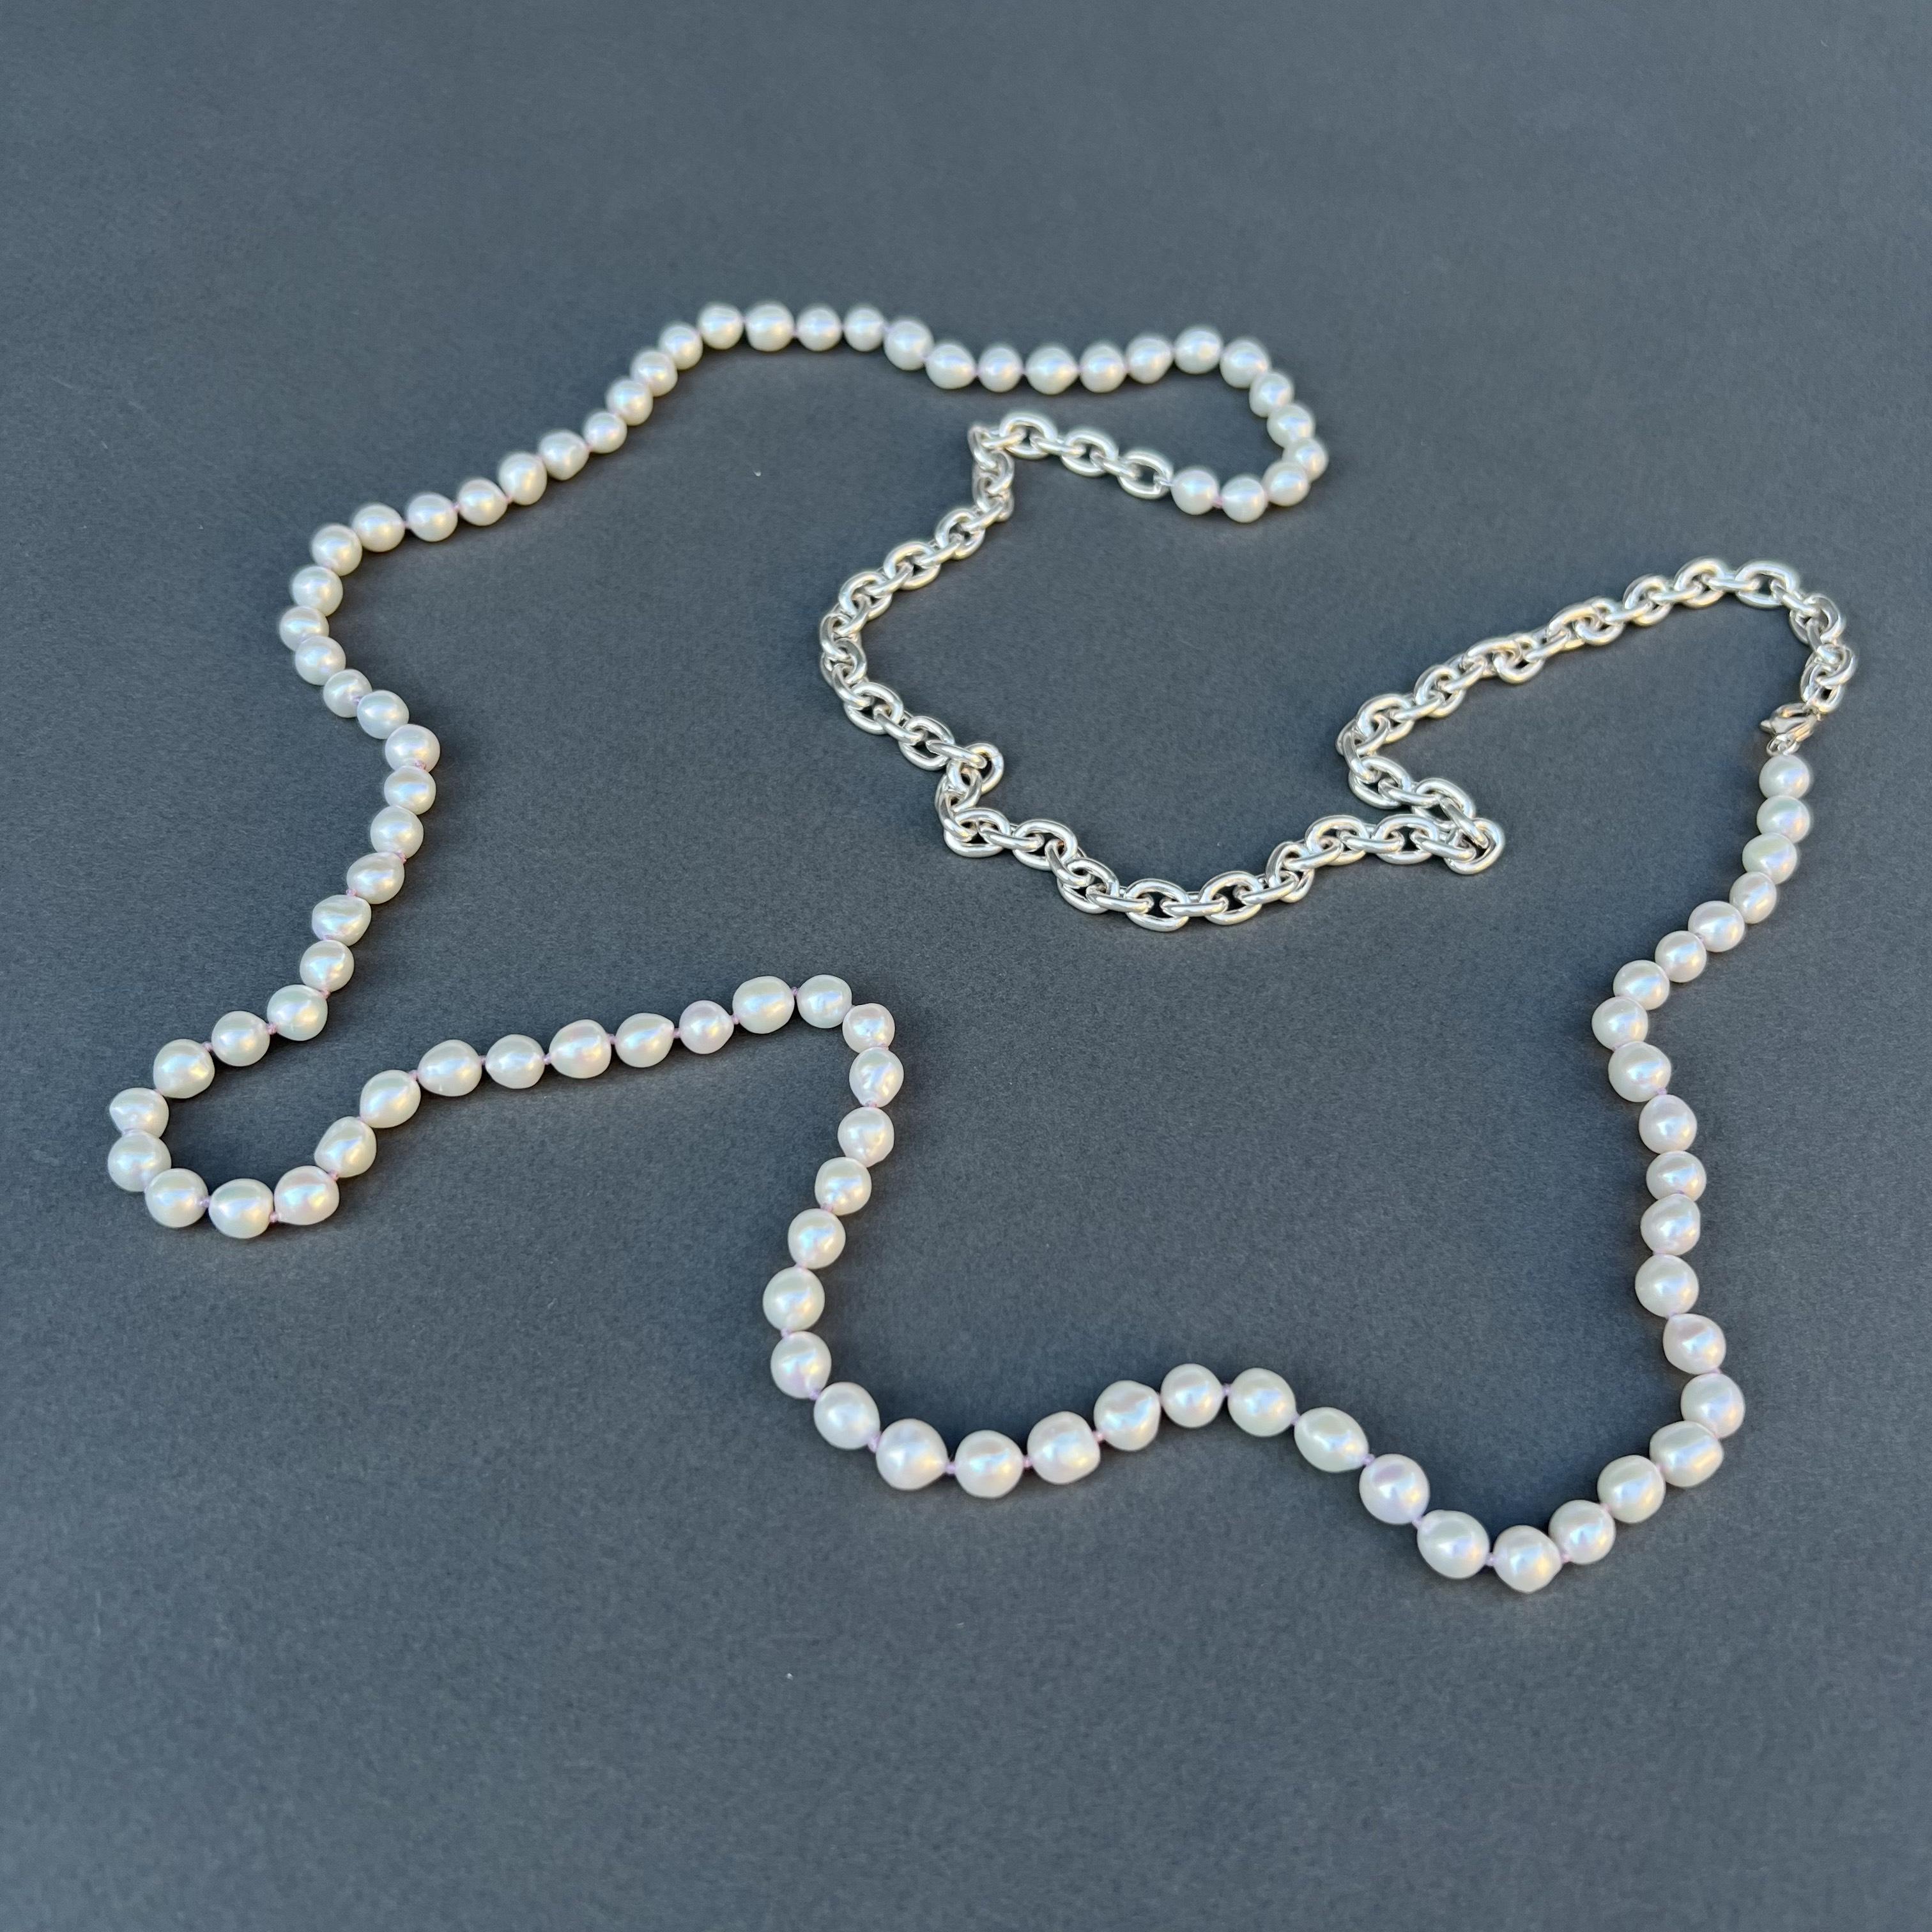 White Pearl Silver Chain Necklace J Dauphin For Sale 2